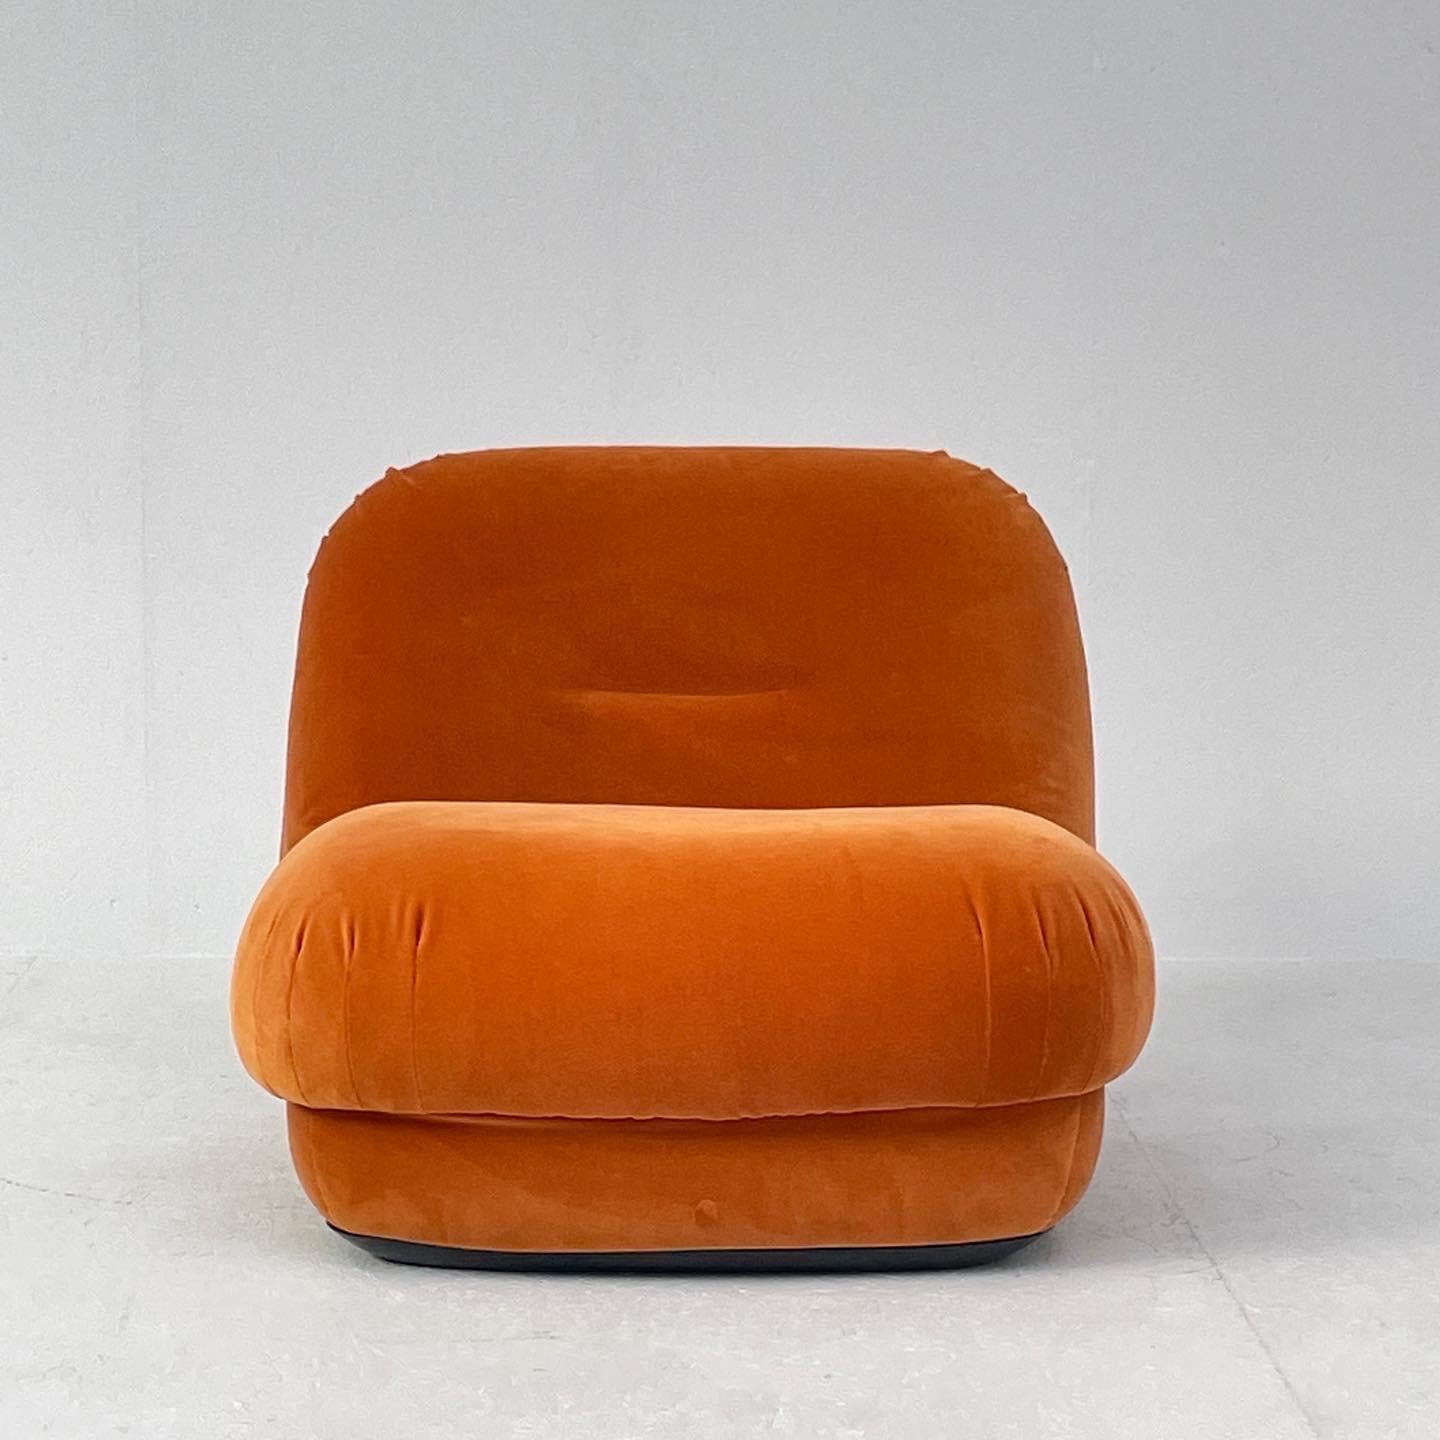 Alberto Rosselli for Saporiti, 'Maxijumbo' lounge chairs, italy, 1970s

Extremely comfortable lounge chairs designed by Alberto Rosselli for Saporiti. These chairs are made to reach an ultimate level of comfort as can clearly be recognized in the